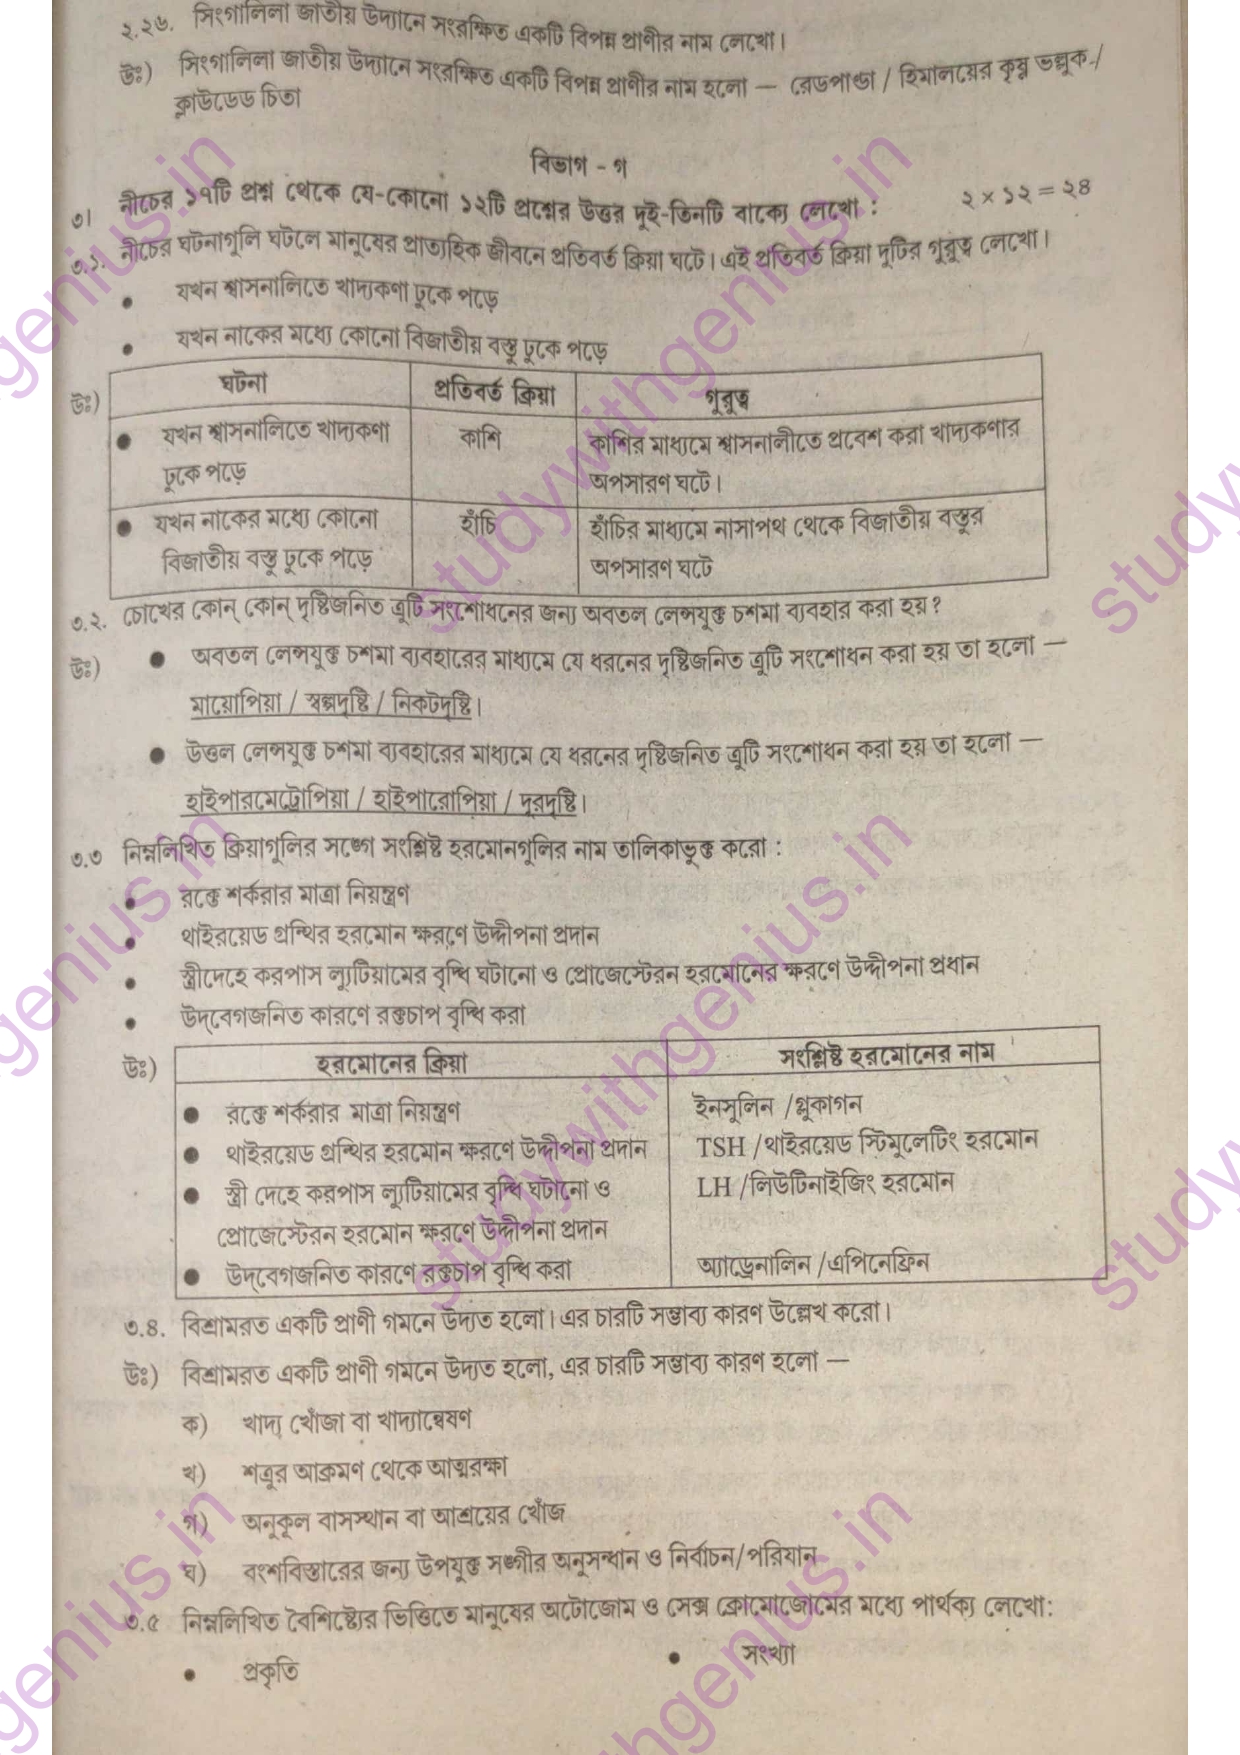 WBBSE Madhyamik Life Science Subject Question Papers Bengali Medium 2018